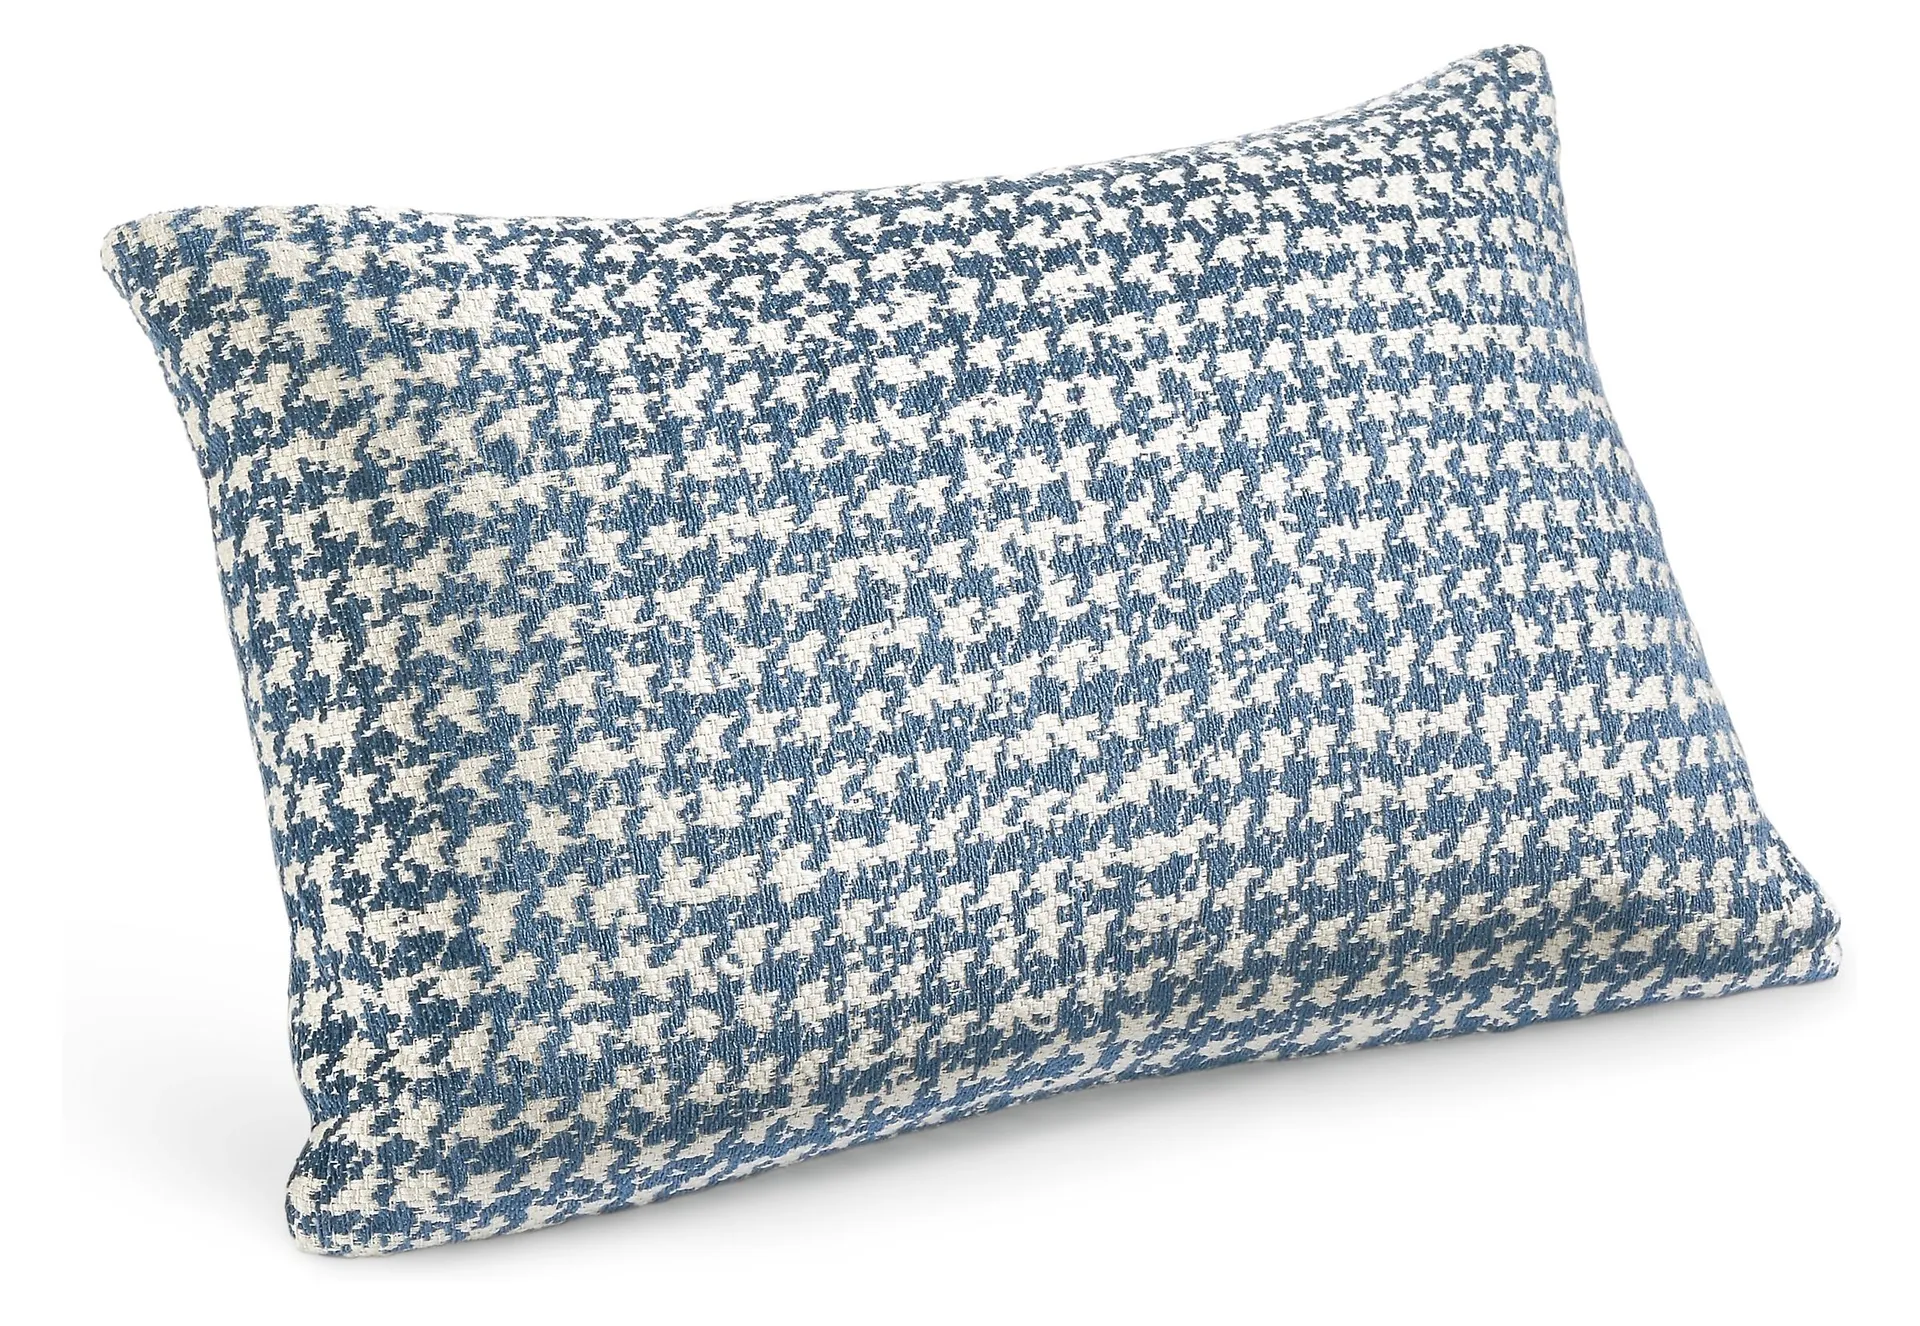 Barnes 20w 13h Throw Pillow in Blue/White with Down Alternative Insert